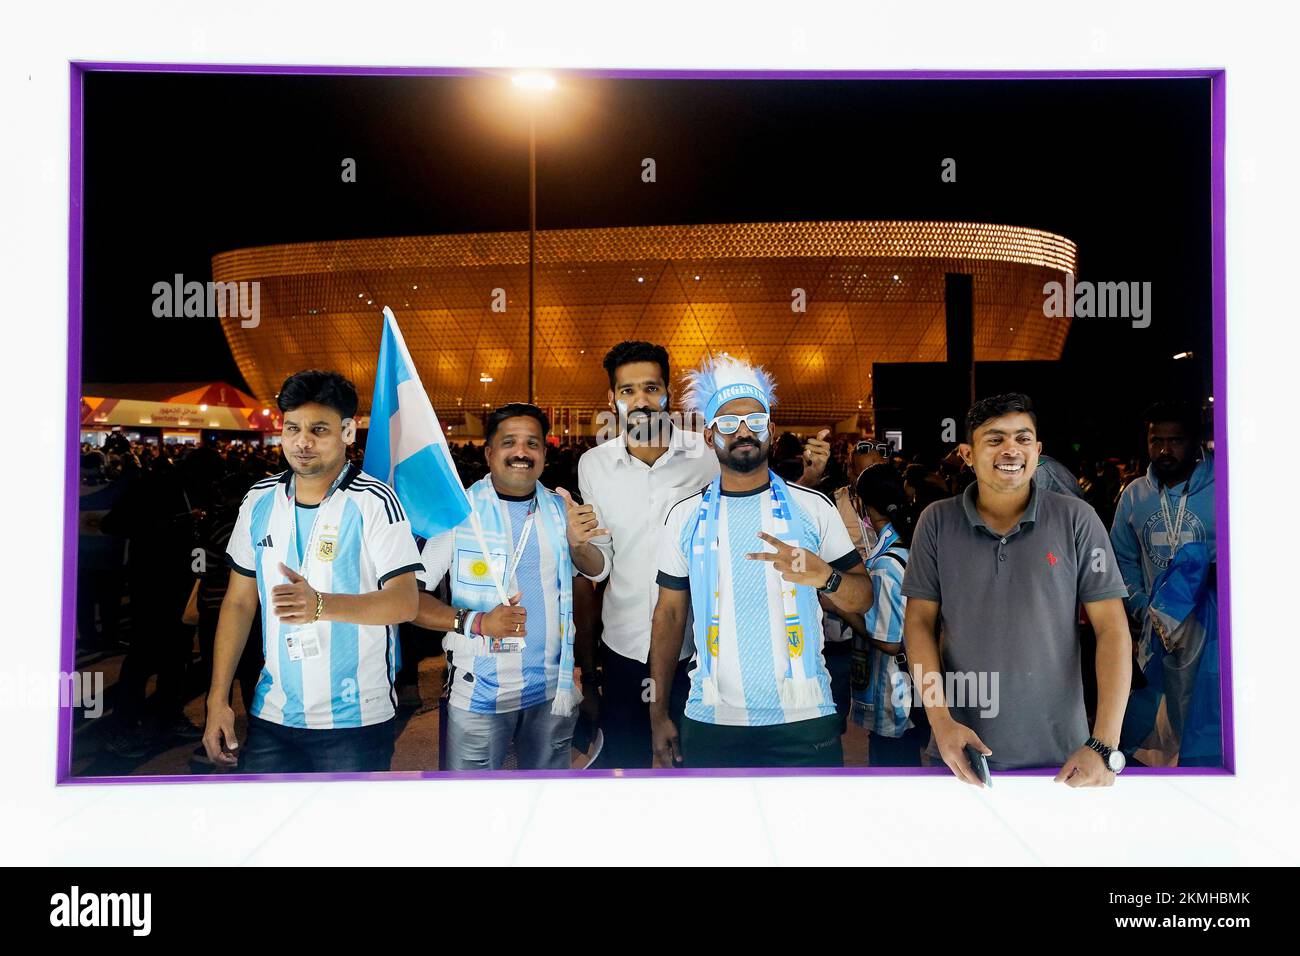 Argentina fans outside Lusail stadium during the FIFA World Cup Qatar 2022 match, Group C, between Argentina and Mexico played at Lusail Stadium on Nov 26, 2022 in Lusail, Qatar. (Photo by Bagu Blanco / PRESSIN) Credit: PRESSINPHOTO SPORTS AGENCY/Alamy Live News Stock Photo